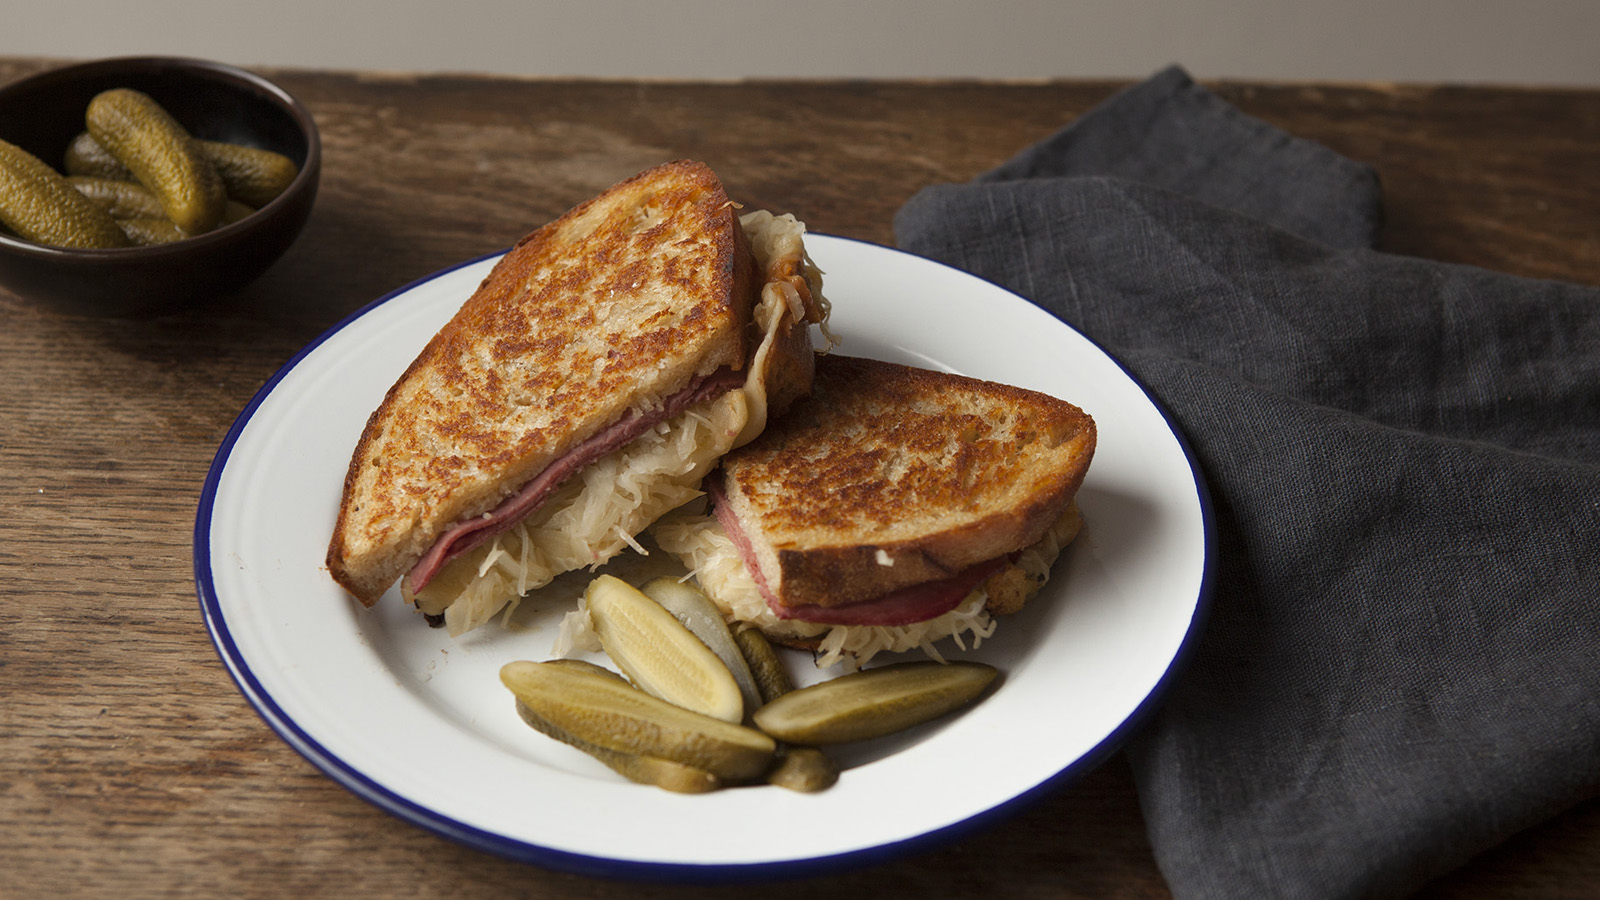 🍴 You Can Eat Dinner Only If You Score at Least 8/16 on This Quiz Reuben sandwich